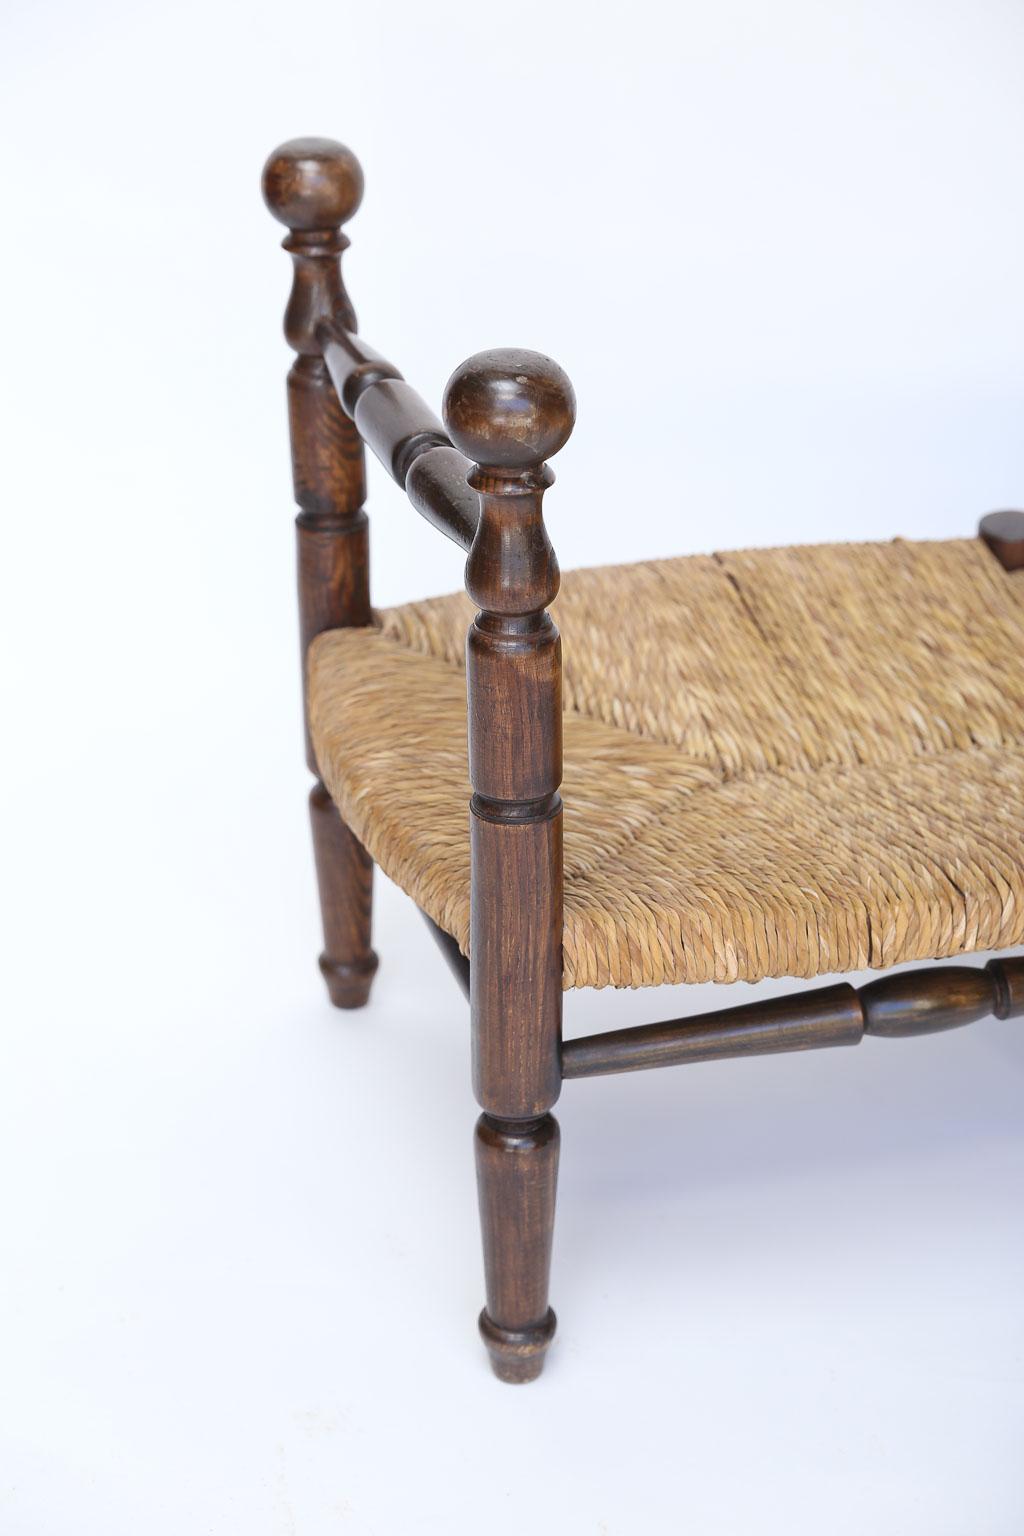 An antique rush seat bench found in France. With turned arms, turned legs and rush that has aged to a beautiful color, the overall look of this piece is beautiful.